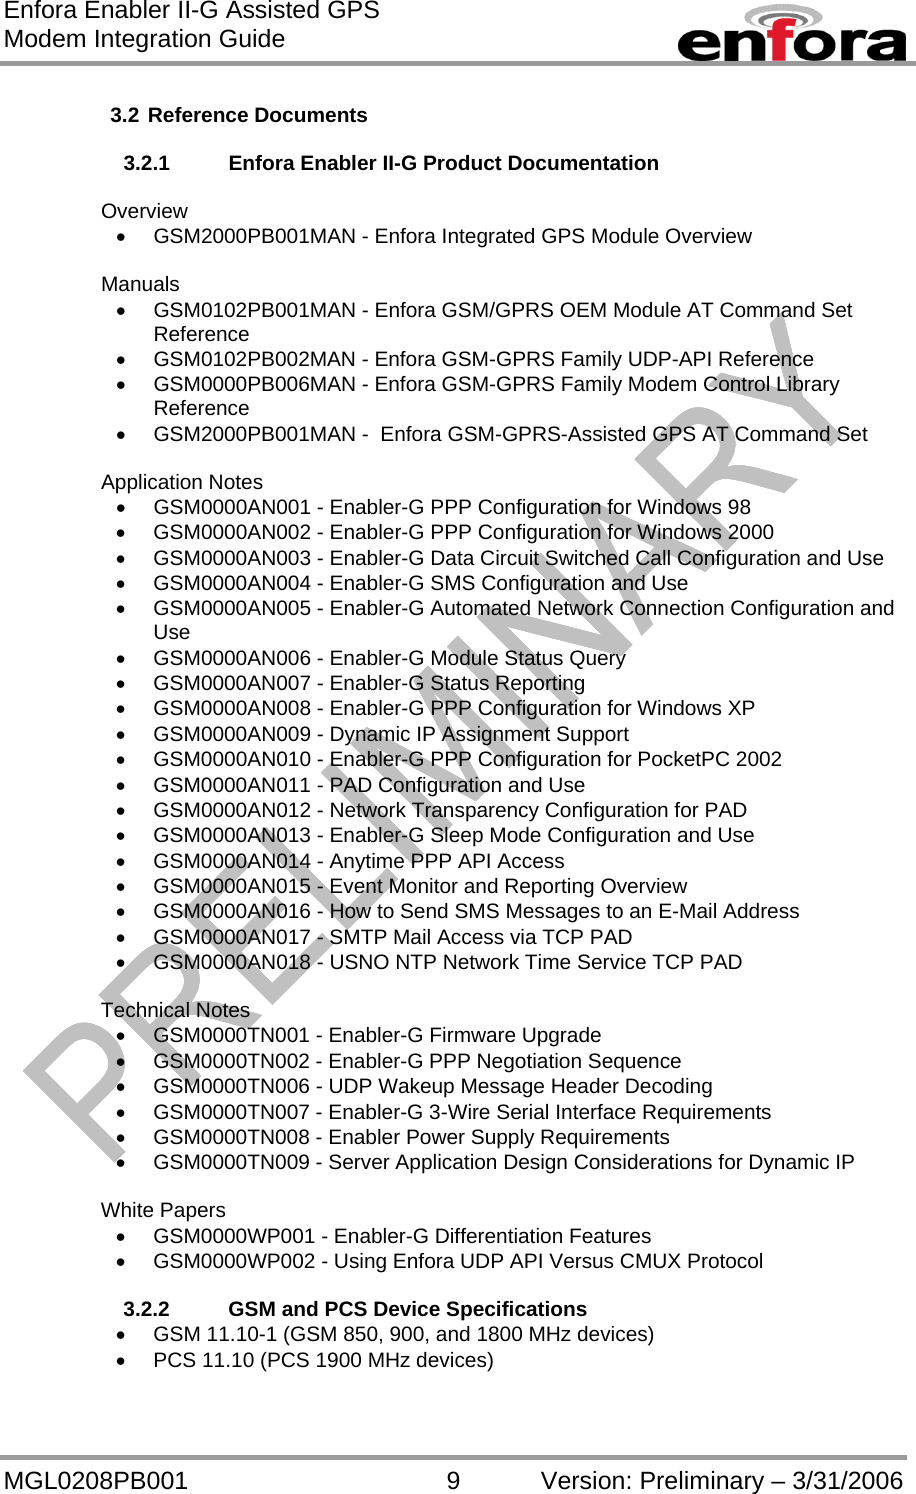 Enfora Enabler II-G Assisted GPS Modem Integration Guide MGL0208PB001 9 Version: Preliminary – 3/31/2006  3.2 Reference Documents  3.2.1  Enfora Enabler II-G Product Documentation  Overview •  GSM2000PB001MAN - Enfora Integrated GPS Module Overview  Manuals •  GSM0102PB001MAN - Enfora GSM/GPRS OEM Module AT Command Set Reference •  GSM0102PB002MAN - Enfora GSM-GPRS Family UDP-API Reference   •  GSM0000PB006MAN - Enfora GSM-GPRS Family Modem Control Library Reference  •  GSM2000PB001MAN -  Enfora GSM-GPRS-Assisted GPS AT Command Set  Application Notes •  GSM0000AN001 - Enabler-G PPP Configuration for Windows 98 •  GSM0000AN002 - Enabler-G PPP Configuration for Windows 2000 •  GSM0000AN003 - Enabler-G Data Circuit Switched Call Configuration and Use •  GSM0000AN004 - Enabler-G SMS Configuration and Use •  GSM0000AN005 - Enabler-G Automated Network Connection Configuration and Use •  GSM0000AN006 - Enabler-G Module Status Query •  GSM0000AN007 - Enabler-G Status Reporting •  GSM0000AN008 - Enabler-G PPP Configuration for Windows XP •  GSM0000AN009 - Dynamic IP Assignment Support •  GSM0000AN010 - Enabler-G PPP Configuration for PocketPC 2002 •  GSM0000AN011 - PAD Configuration and Use •  GSM0000AN012 - Network Transparency Configuration for PAD •  GSM0000AN013 - Enabler-G Sleep Mode Configuration and Use •  GSM0000AN014 - Anytime PPP API Access •  GSM0000AN015 - Event Monitor and Reporting Overview •  GSM0000AN016 - How to Send SMS Messages to an E-Mail Address •  GSM0000AN017 - SMTP Mail Access via TCP PAD •  GSM0000AN018 - USNO NTP Network Time Service TCP PAD  Technical Notes •  GSM0000TN001 - Enabler-G Firmware Upgrade •  GSM0000TN002 - Enabler-G PPP Negotiation Sequence •  GSM0000TN006 - UDP Wakeup Message Header Decoding •  GSM0000TN007 - Enabler-G 3-Wire Serial Interface Requirements •  GSM0000TN008 - Enabler Power Supply Requirements •  GSM0000TN009 - Server Application Design Considerations for Dynamic IP  White Papers •  GSM0000WP001 - Enabler-G Differentiation Features •  GSM0000WP002 - Using Enfora UDP API Versus CMUX Protocol  3.2.2  GSM and PCS Device Specifications •  GSM 11.10-1 (GSM 850, 900, and 1800 MHz devices) •  PCS 11.10 (PCS 1900 MHz devices)  